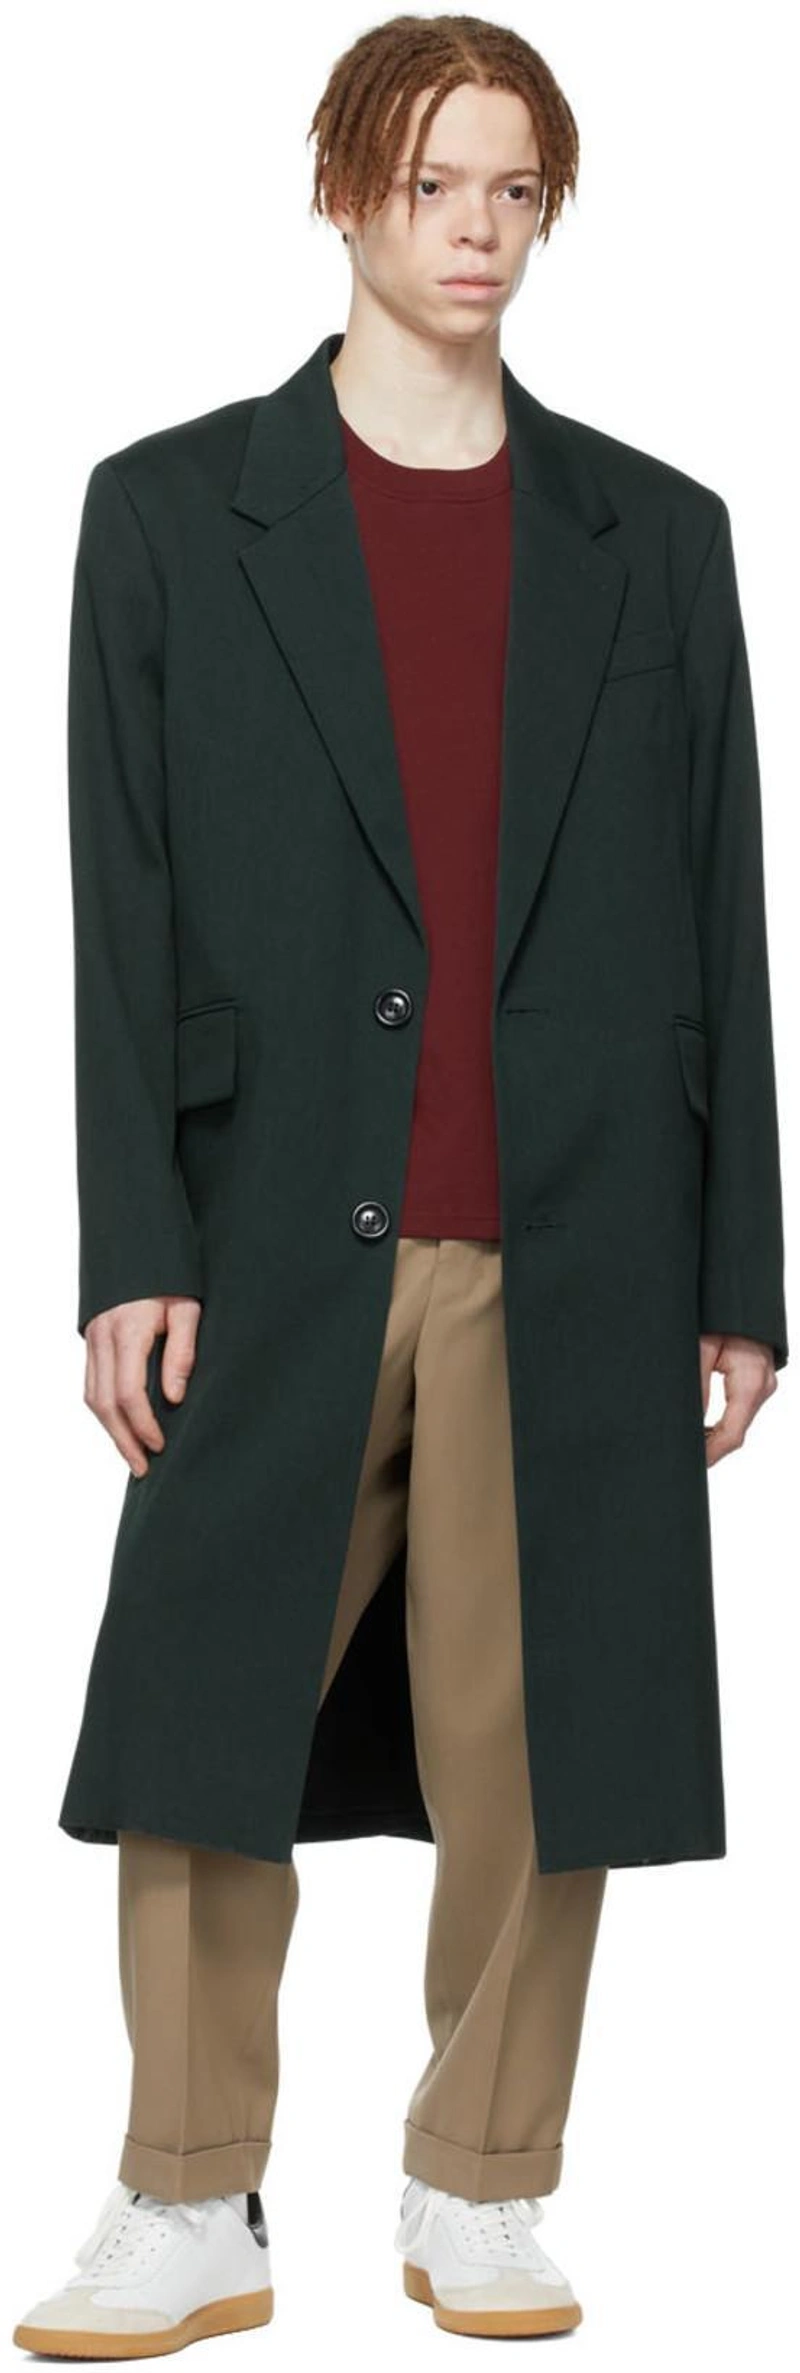 SSENSE's Post | 搭配: Ami Alexandre Mattiussi Green Wool Coat In Evergreen/311；Ami Alexandre Mattiussi Brown Polyester Trousers In Taupe/281；Isabel Marant 白色 Bethy 运动鞋 In White